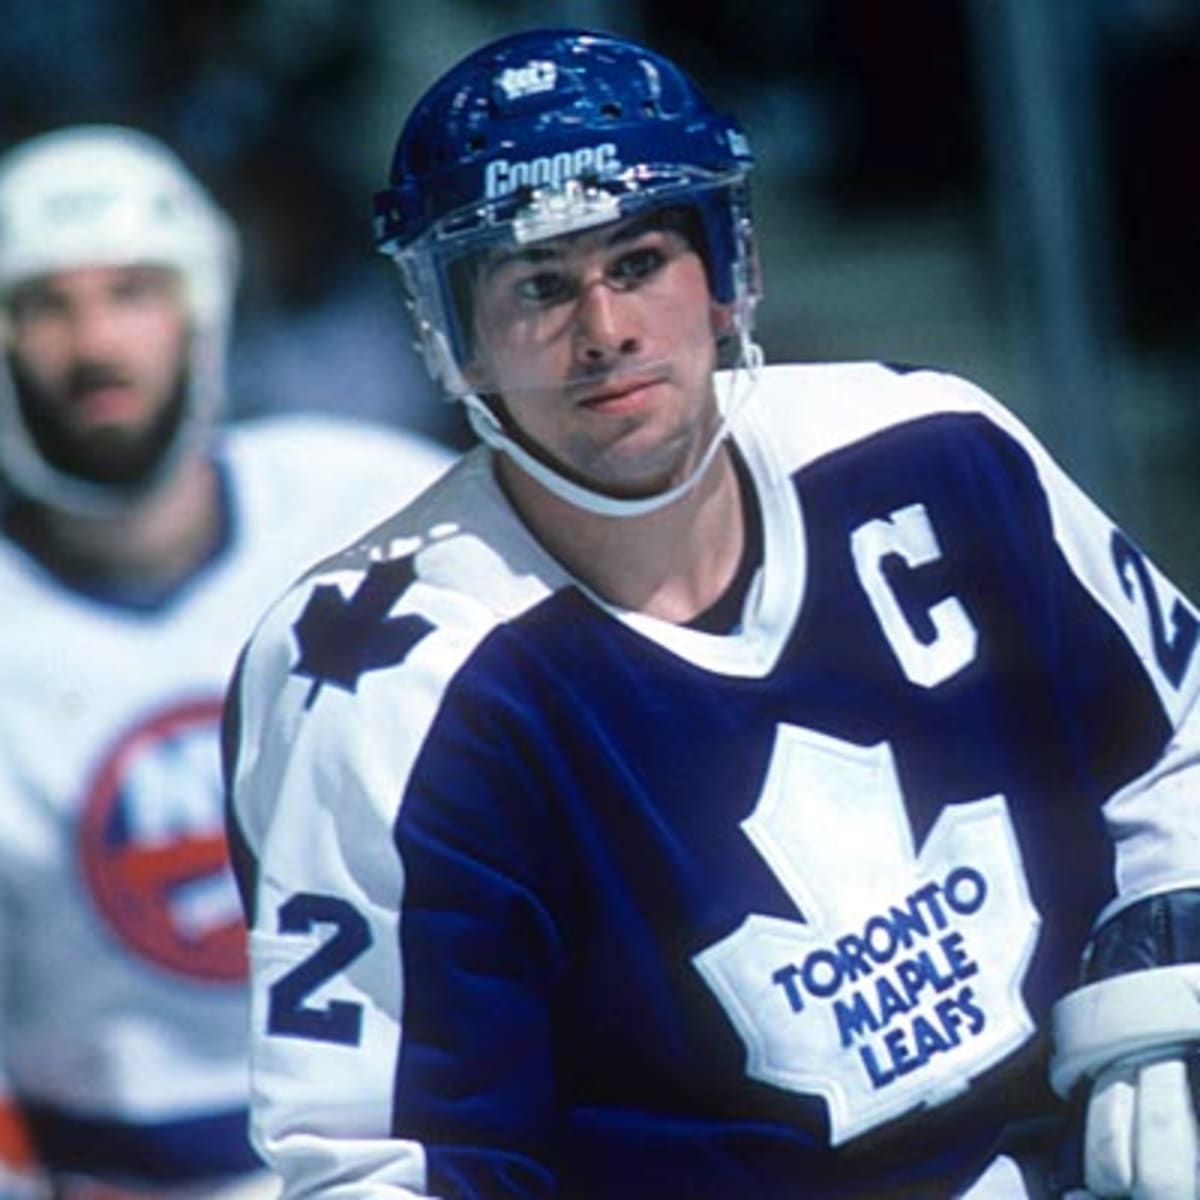 This Day In Hockey History-March 24, 1982-Rick Vaive Becomes The First 50-Goal Scorer in Maple Leafs History